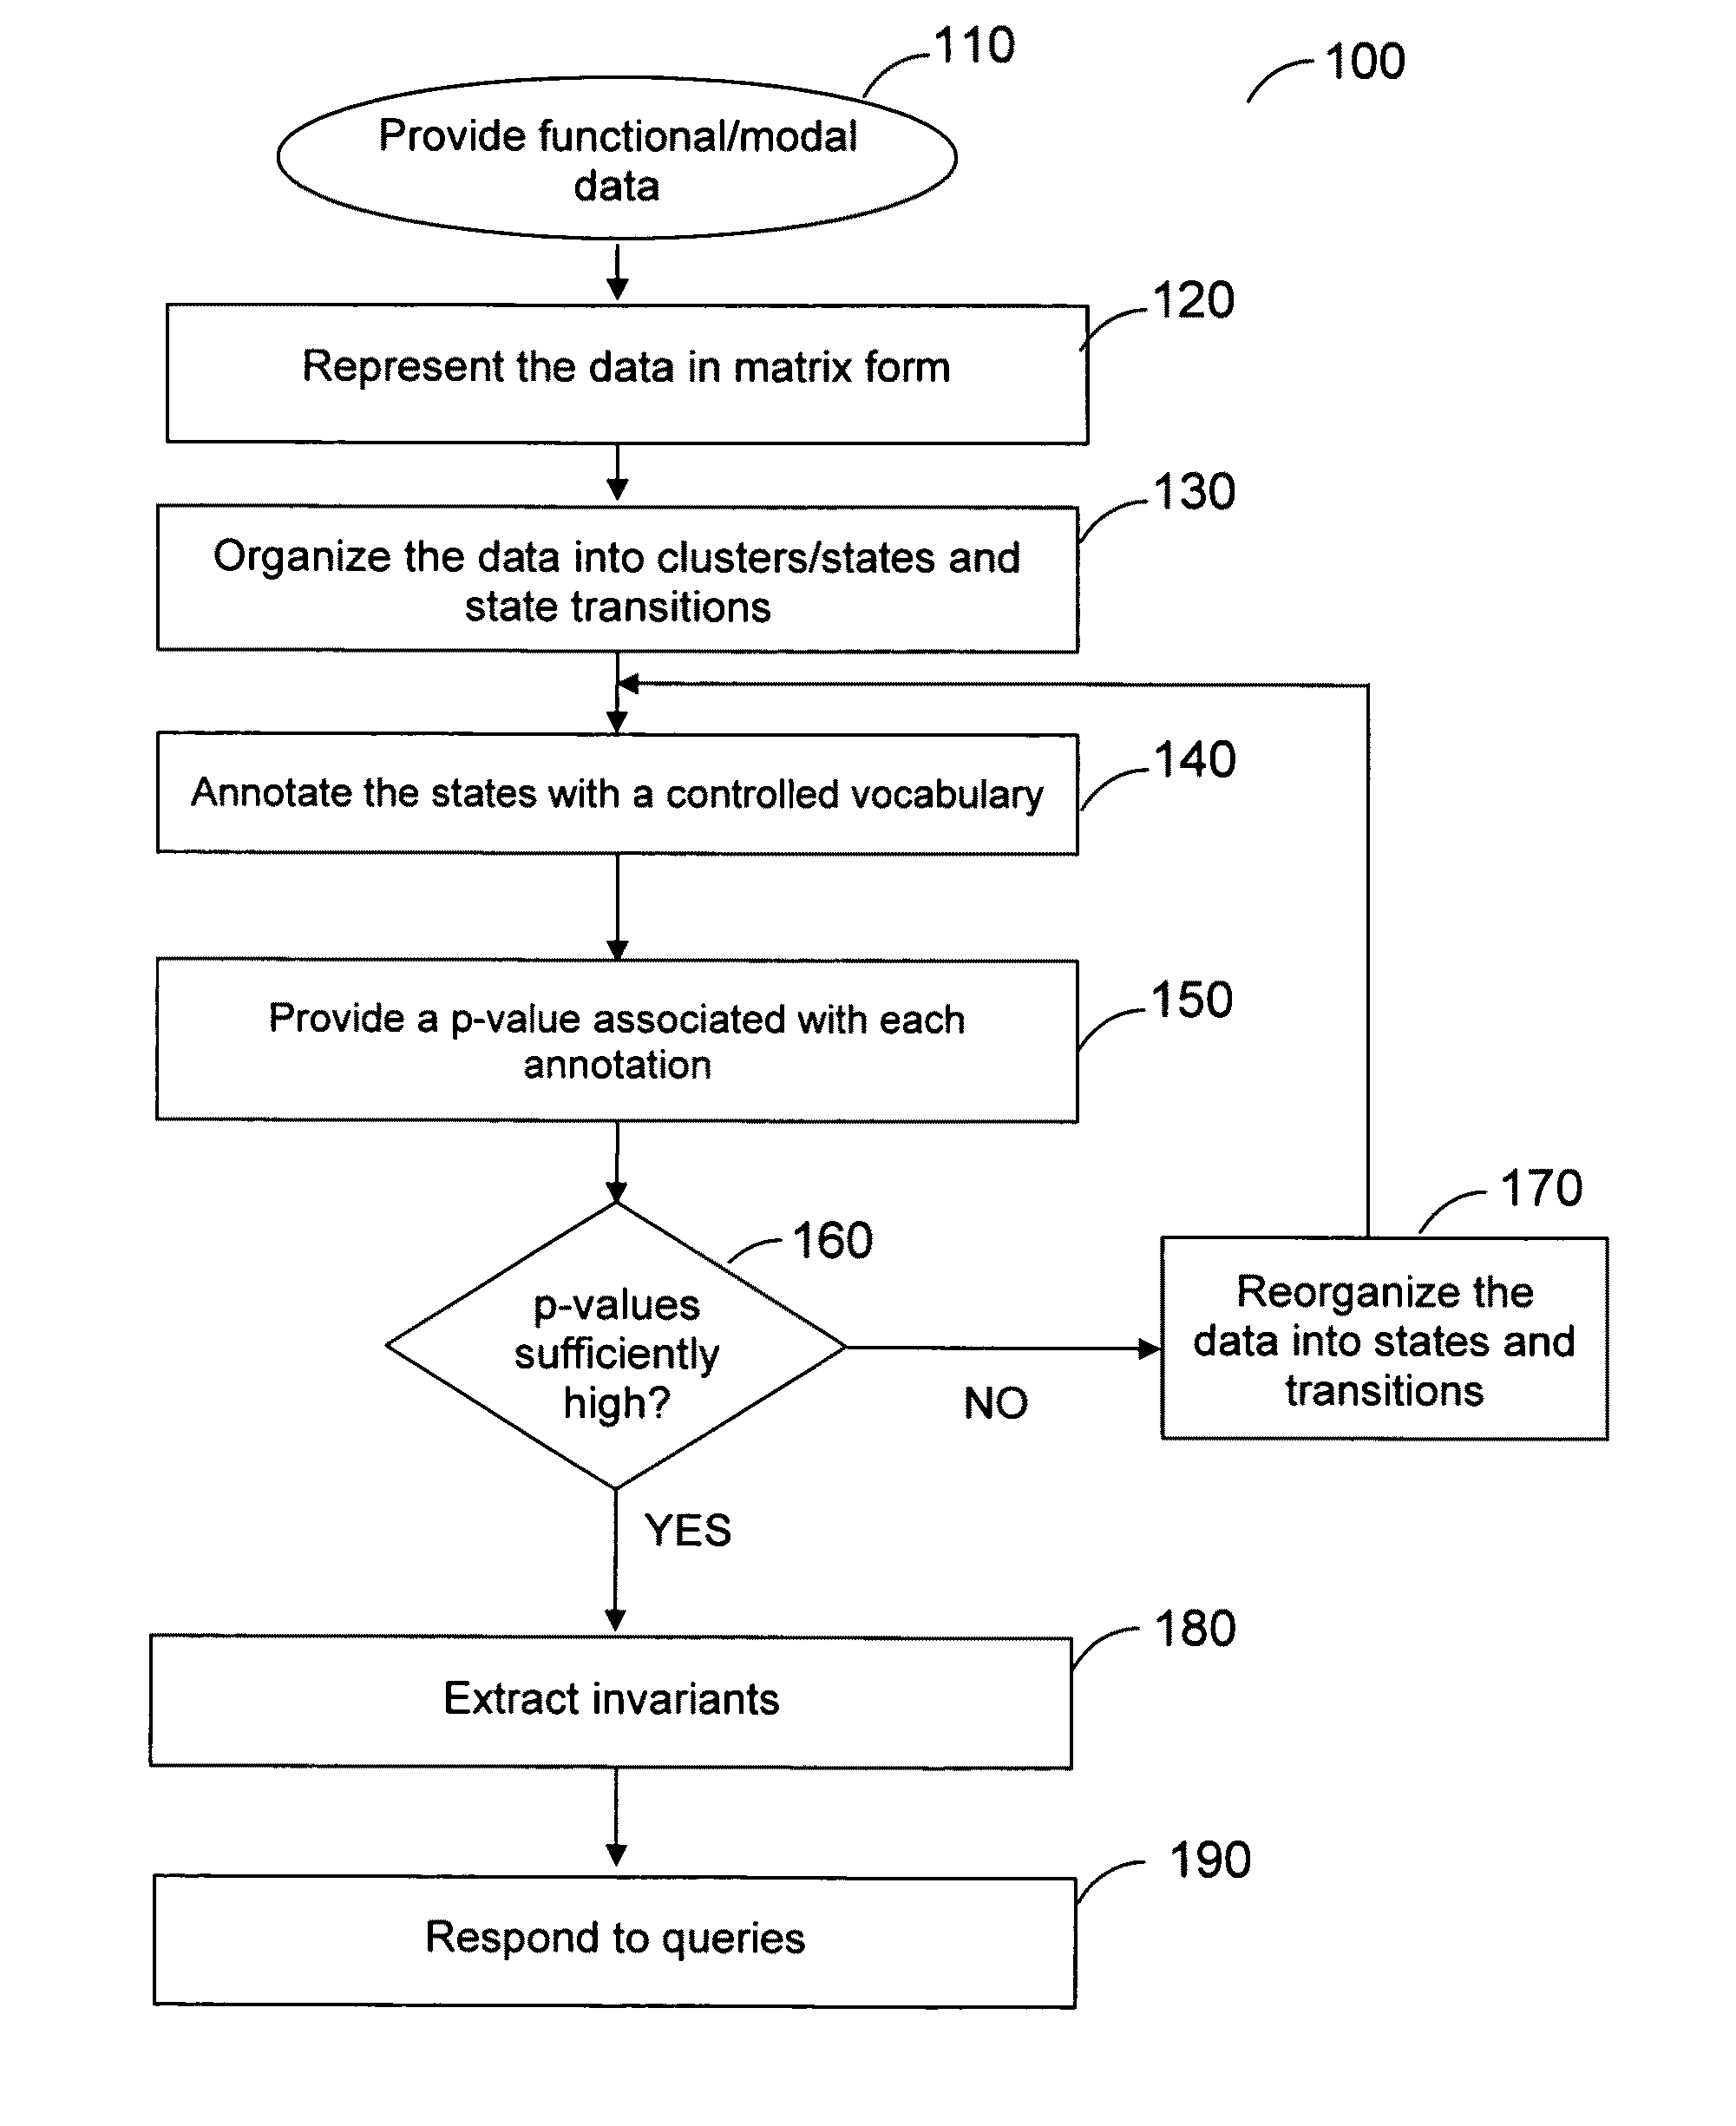 Method, system and software arrangement for reconstructing formal descriptive models of processes from functional/modal data using suitable ontology